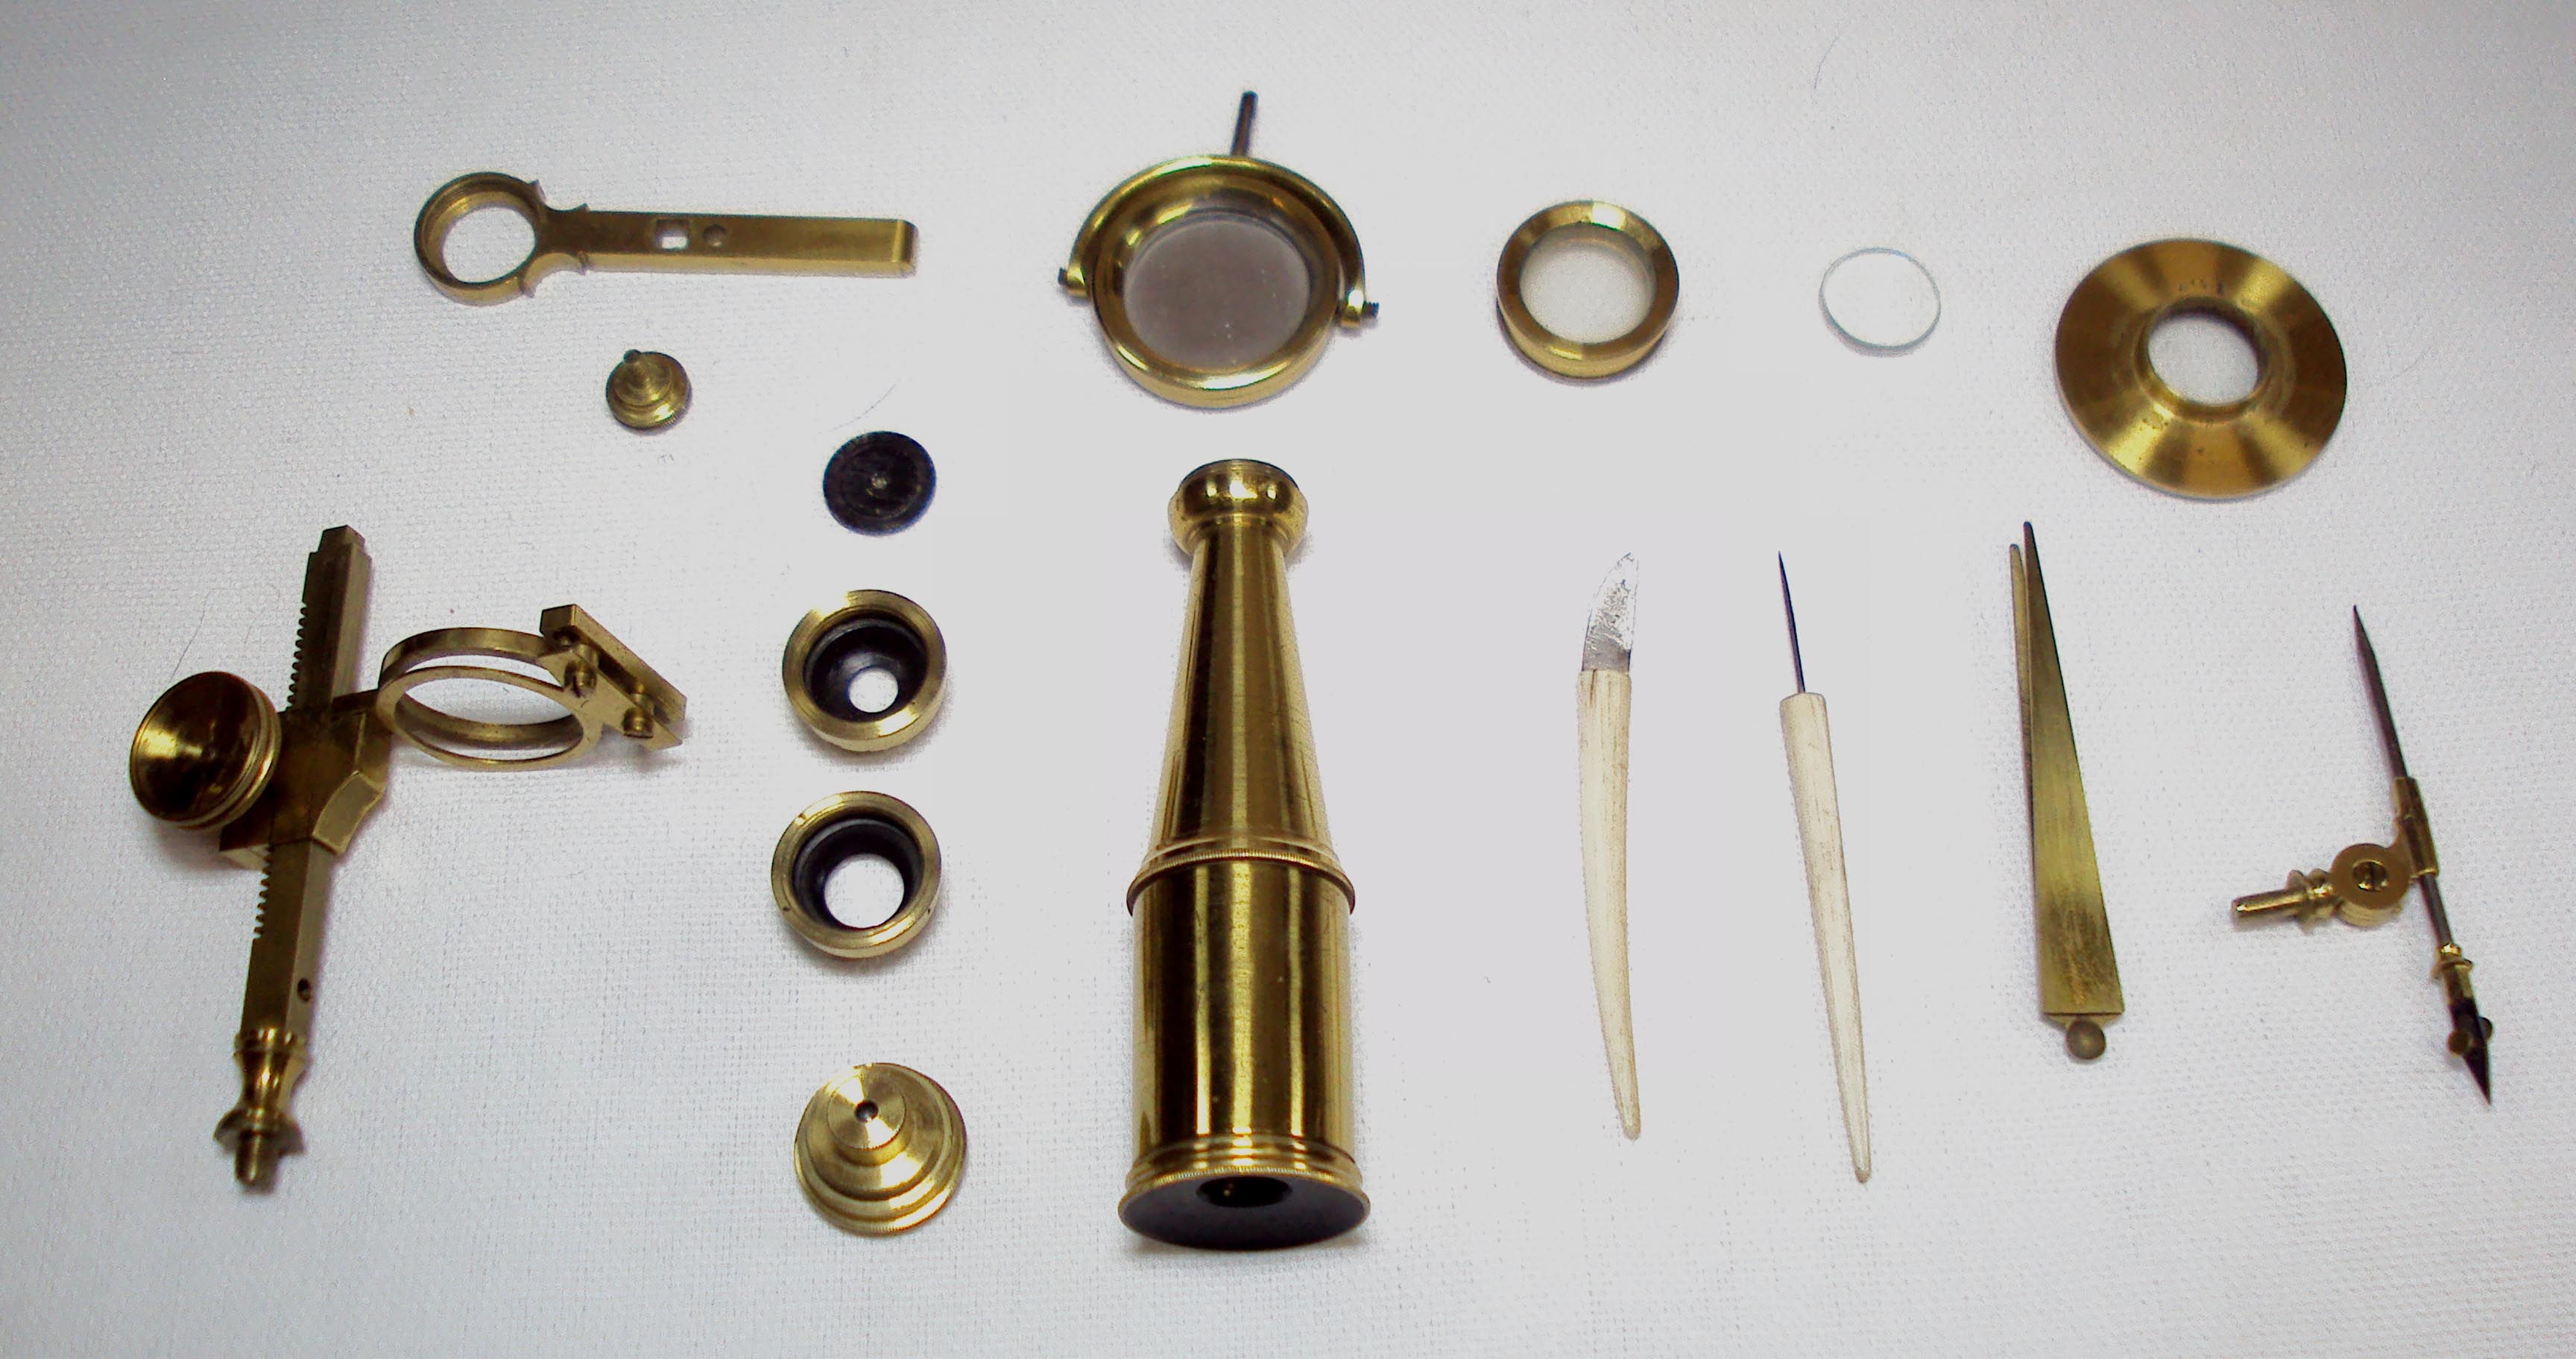 Gould microscope parts and accessories